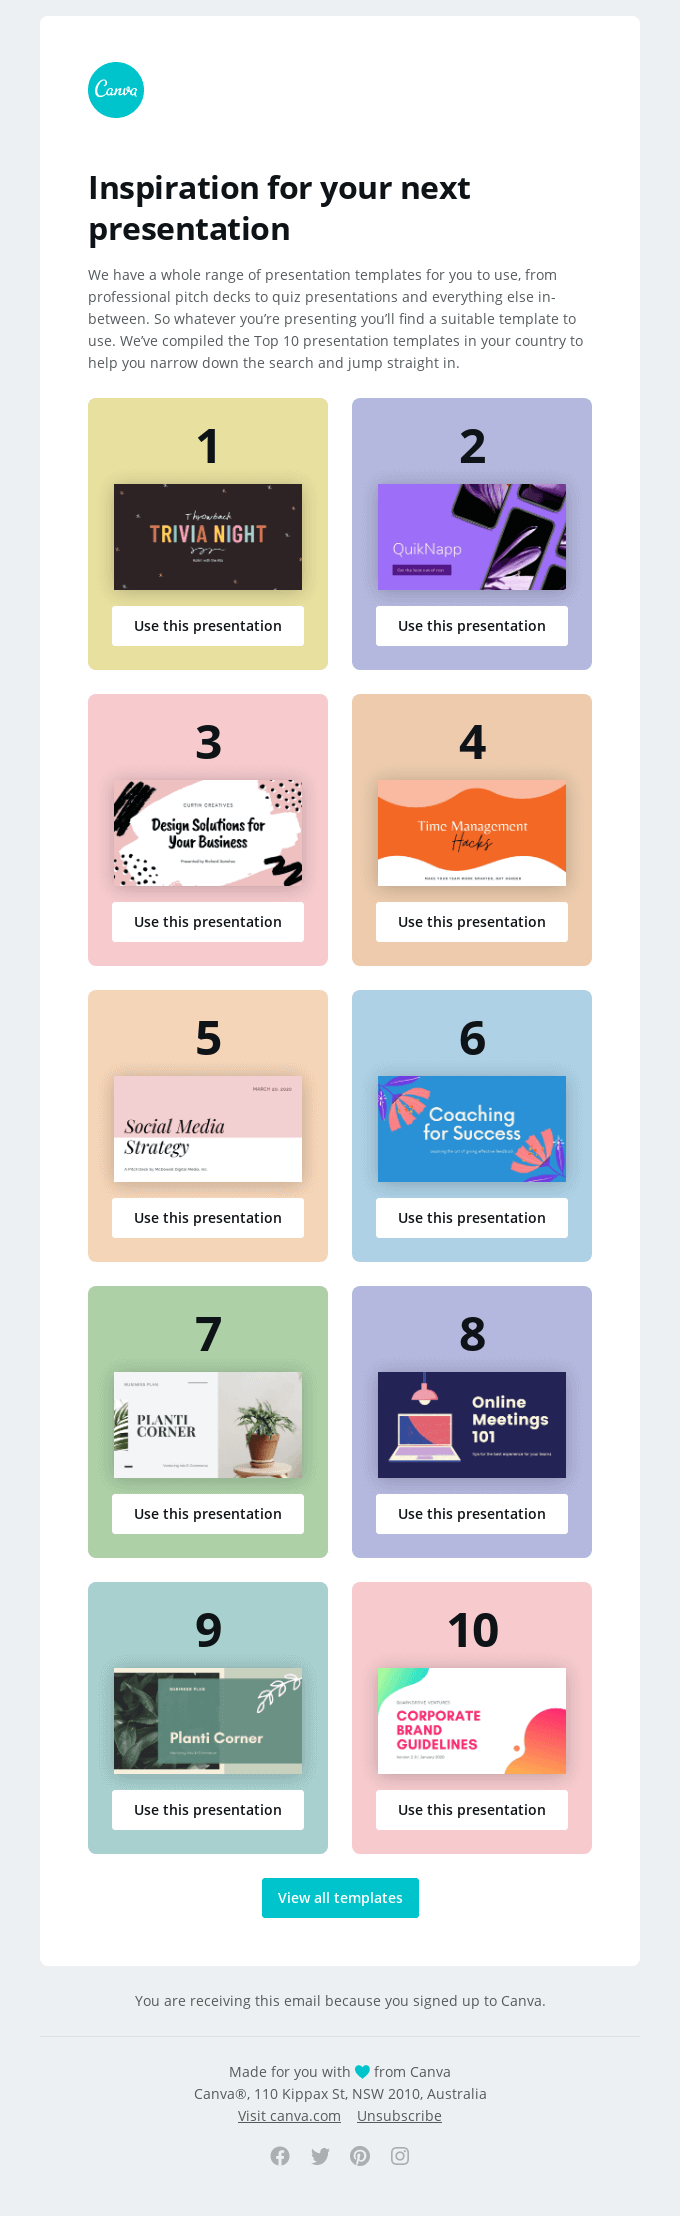 Discover US' Top 10 Presentation templates - Canva Email Newsletter